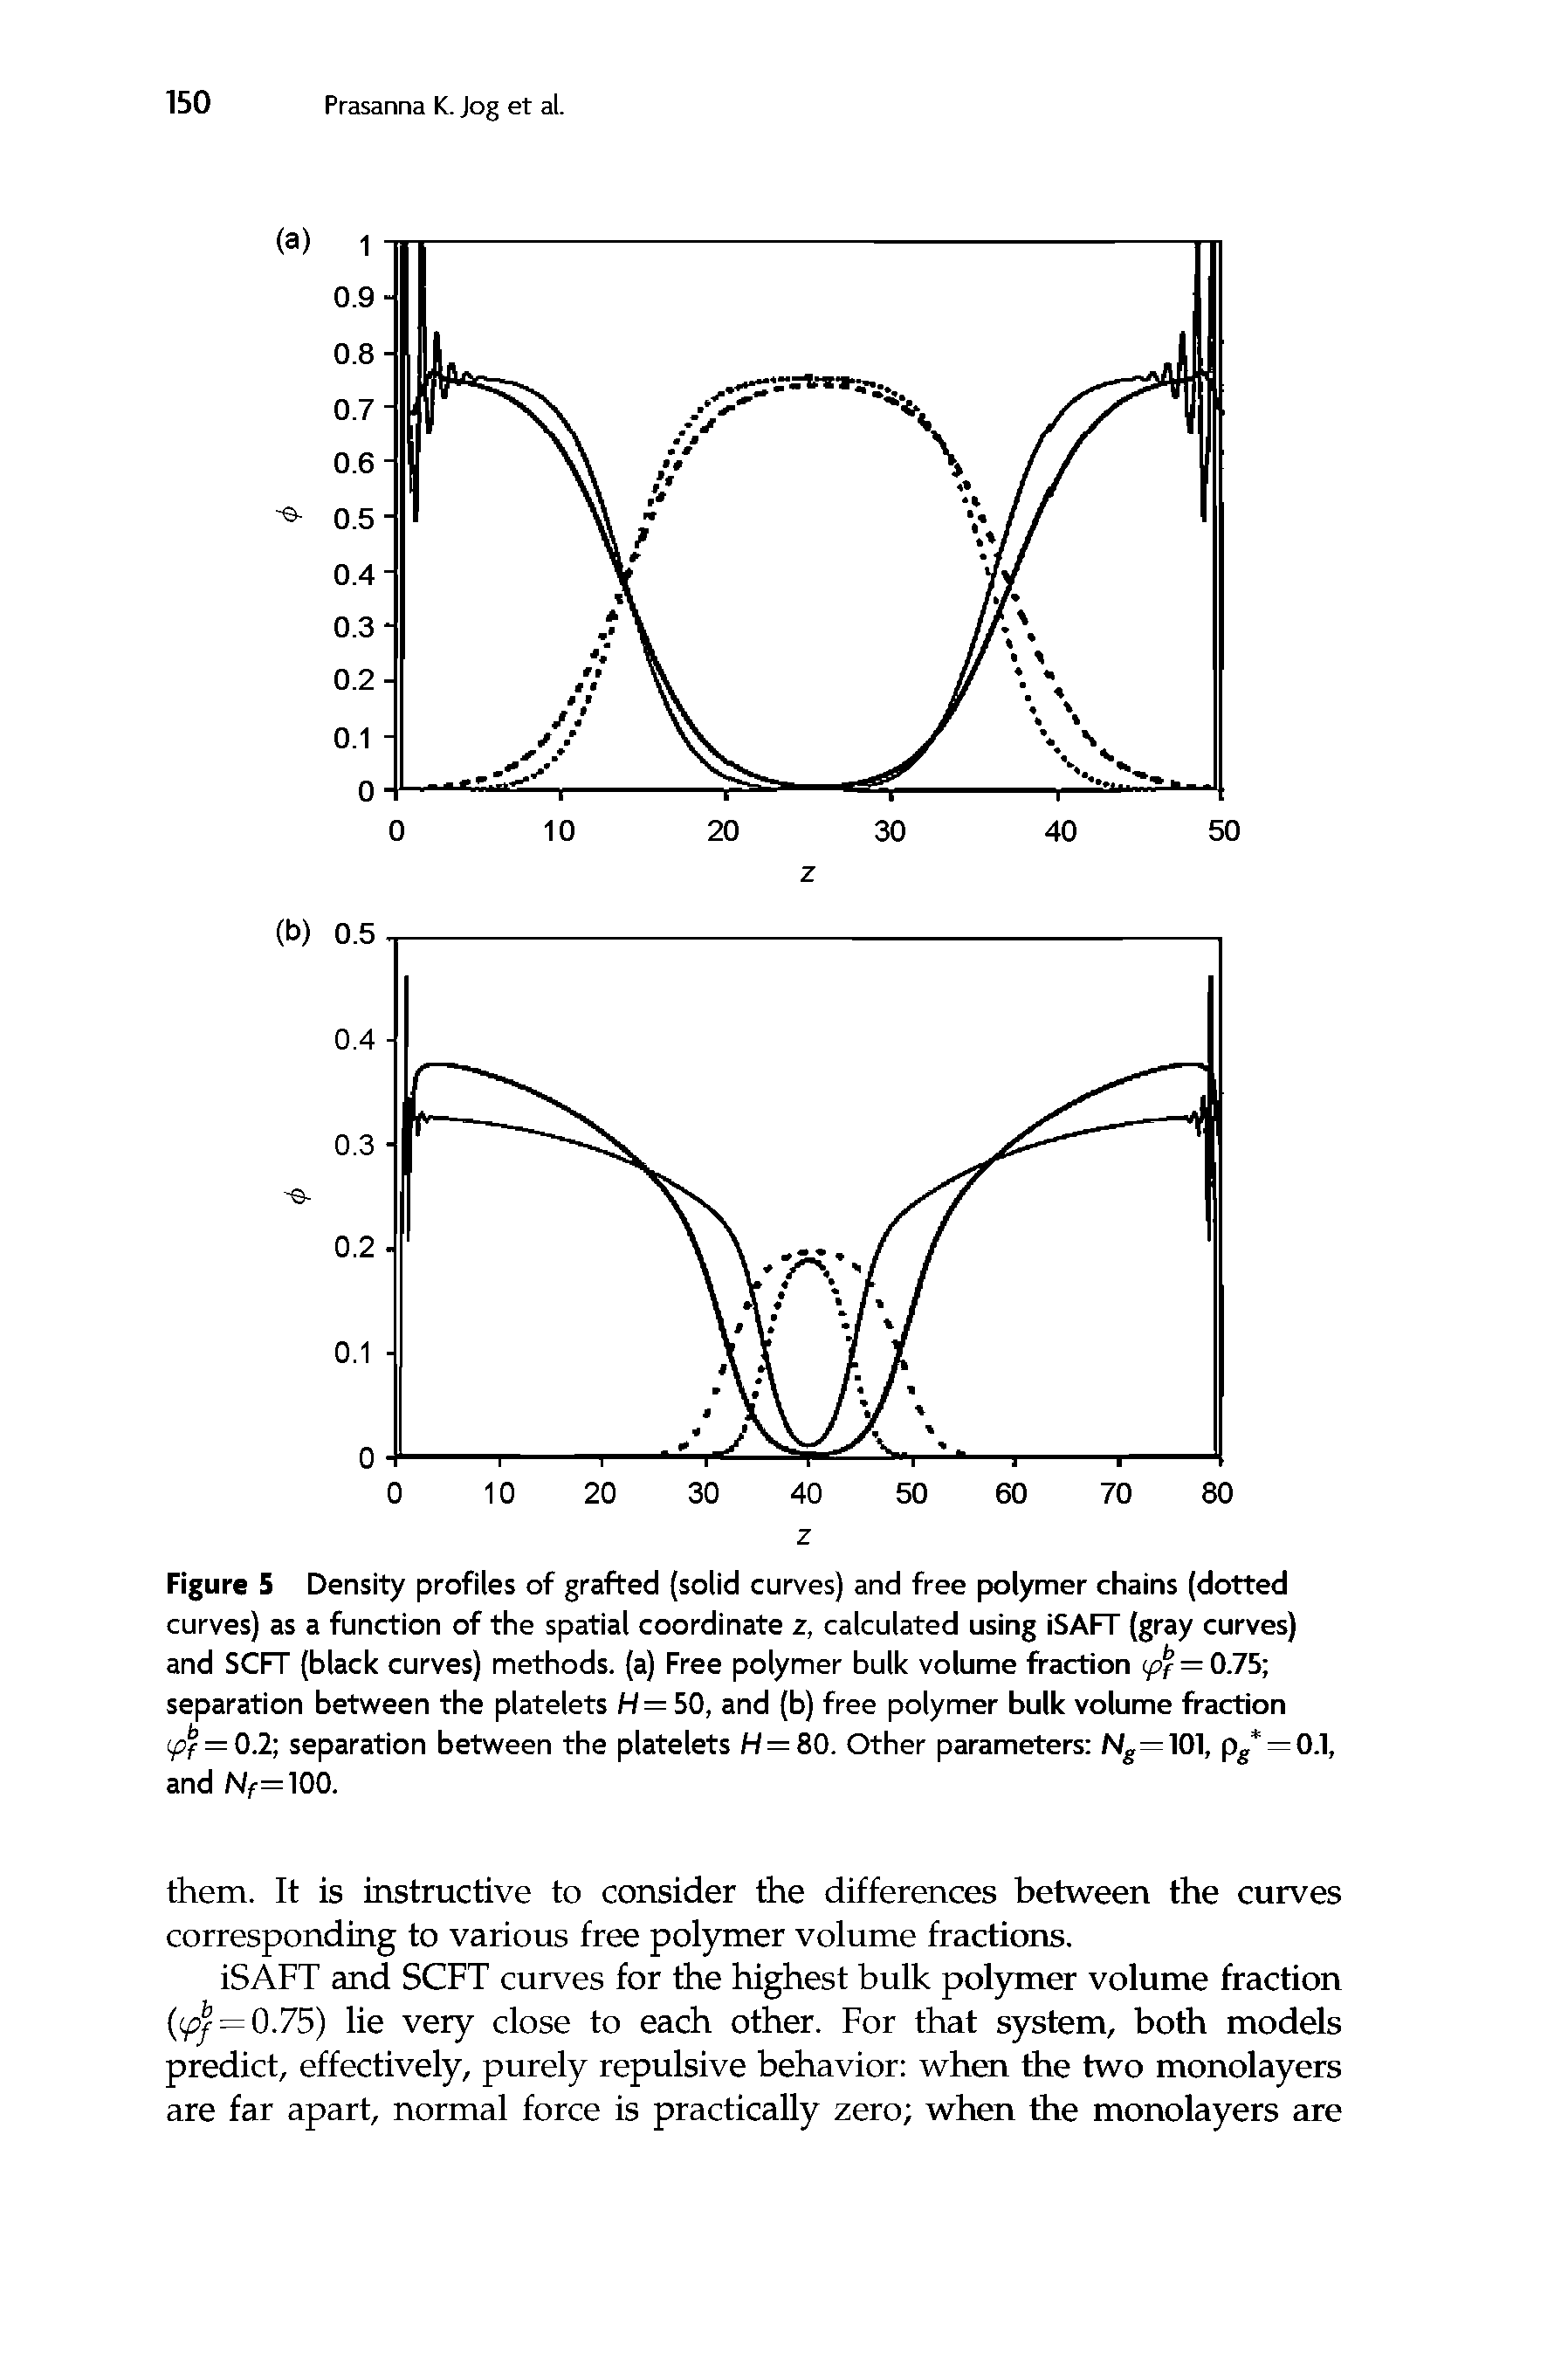 Figure 5 Density profiles of grafted (solid curves) and free polymer chains (dotted curves) as a function of the spatial coordinate z, calculated using iSAFT (gray curves) and SOFT (black curves) methods, (a) Free polymer bulk volume fraction tpf = 0.75 separation between the platelets H = 50, and (b) free polymer bulk volume fraction (pf = 0.2 separation between the platelets H = 80. Other parameters Ng —101, pg — 0.1, and Nf= 100.